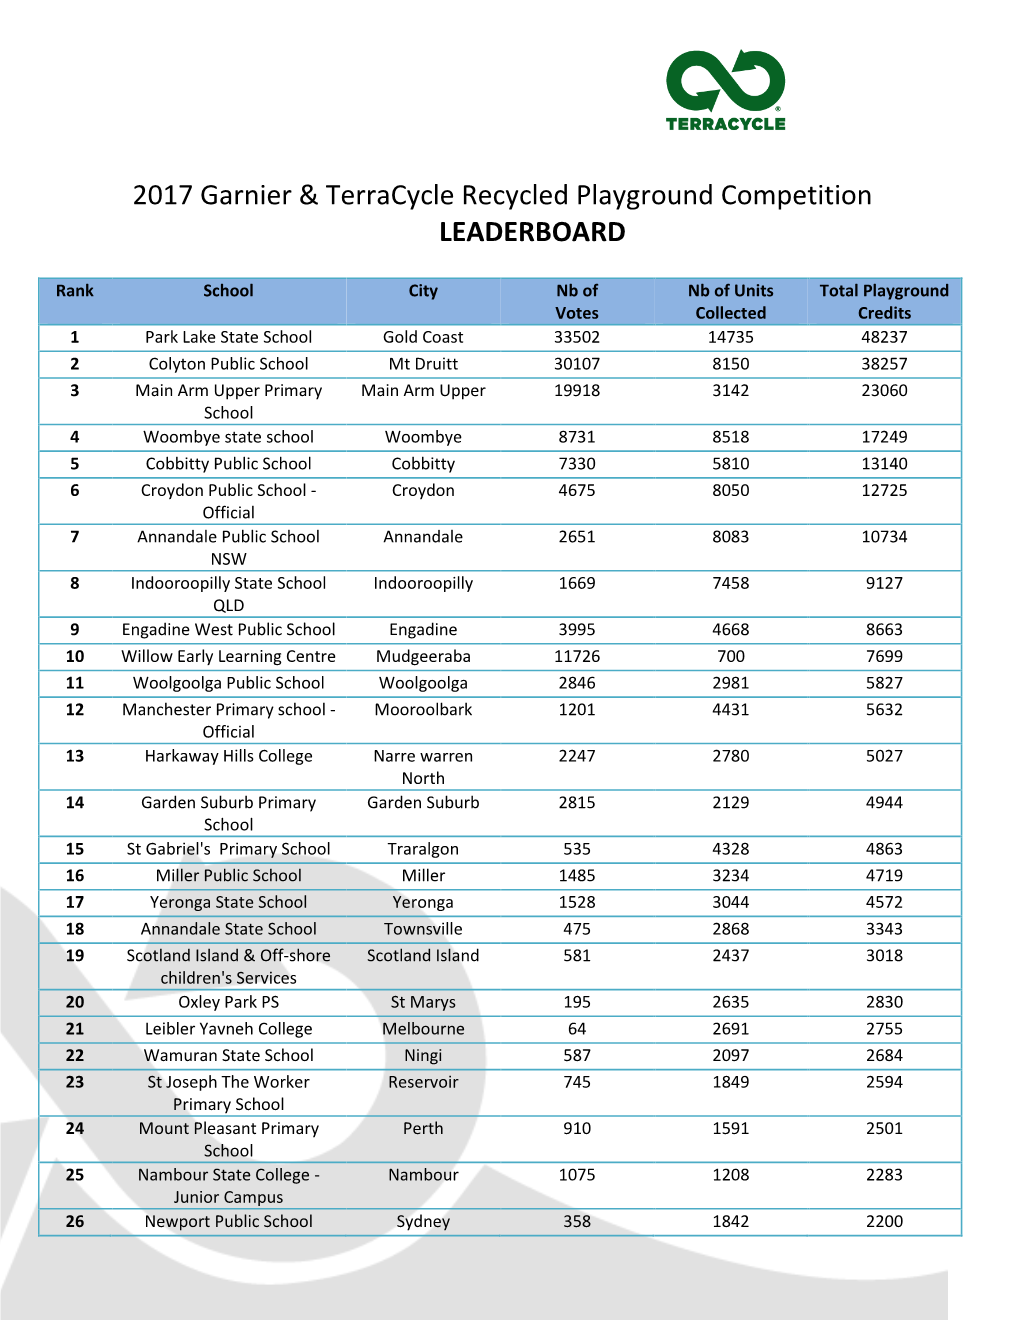 2017 Garnier & Terracycle Recycled Playground Competition LEADERBOARD